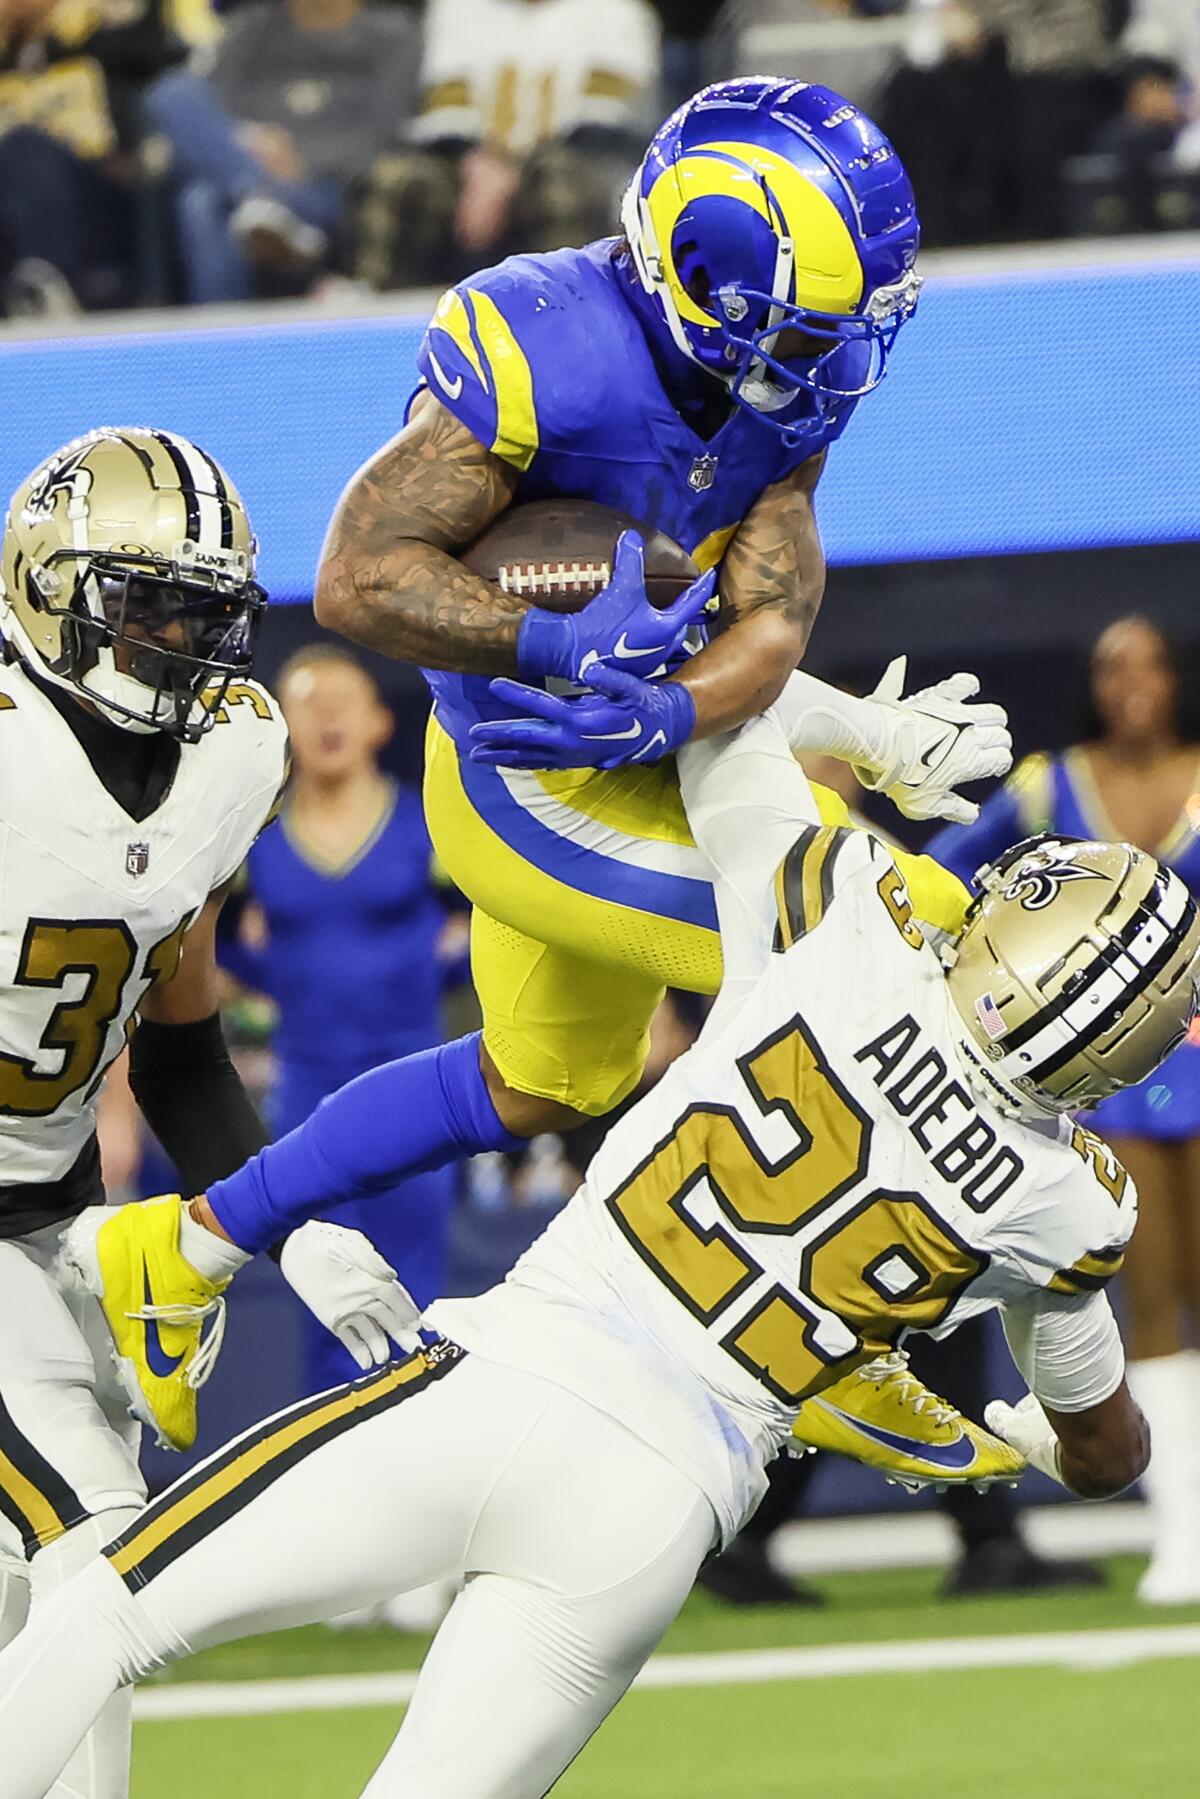 The Rams' Kyren Williams leaps into the end zone for a 10-yard touchdown run against the Saints.